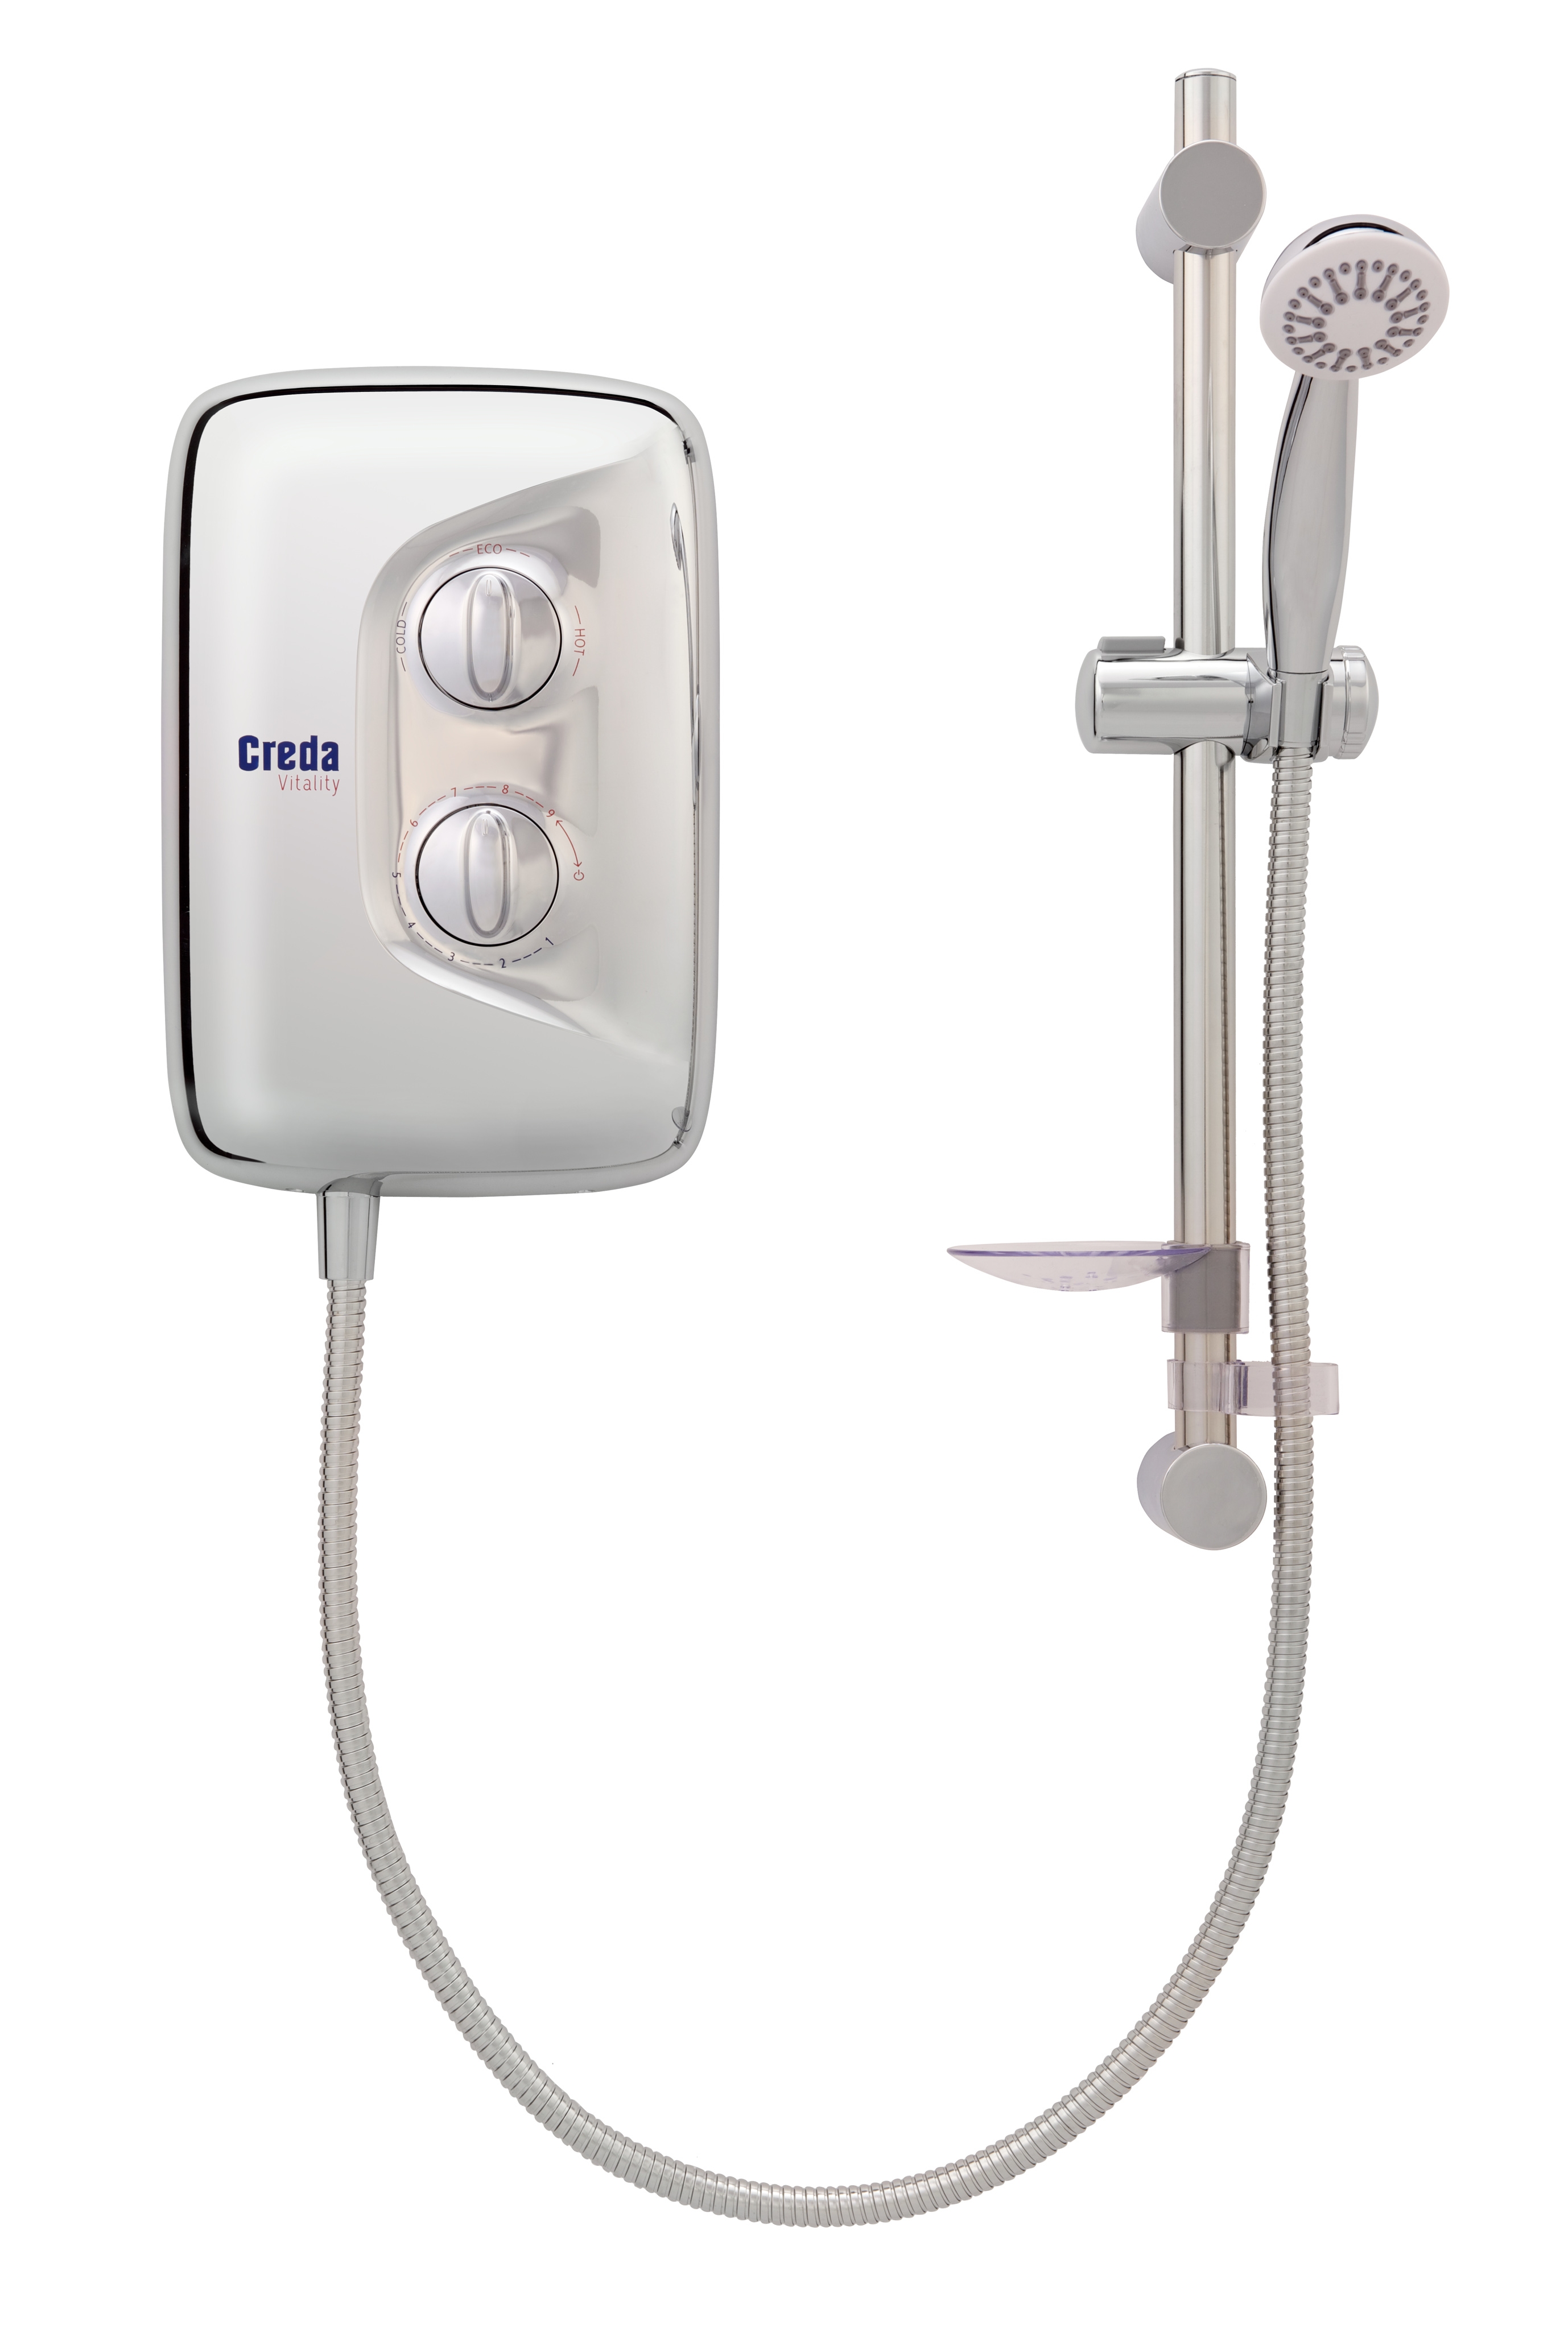 Some Essentials You Should Look For In An Ideal Electric Shower